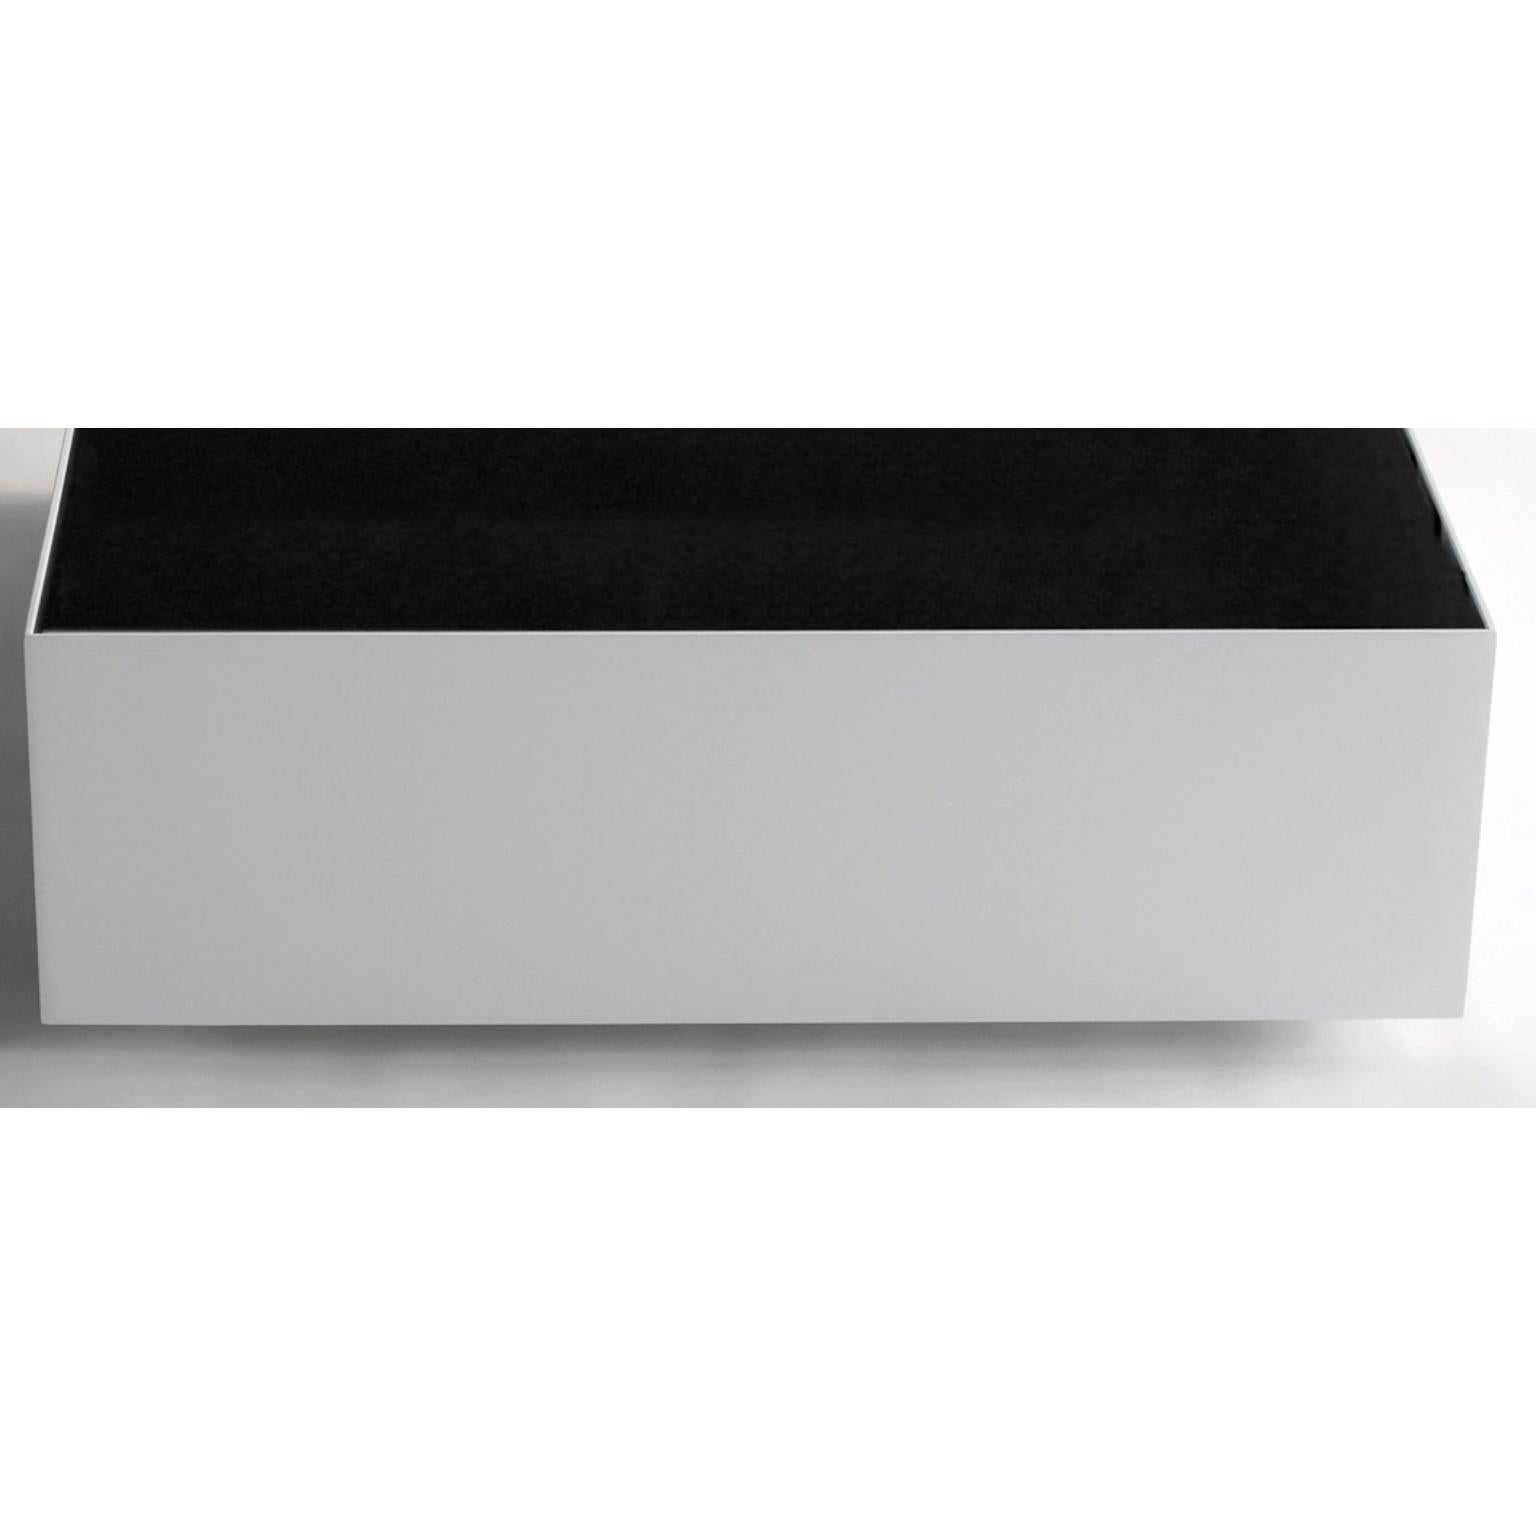 Powder-Coated Black Ice Coffee Table by Phase Design For Sale